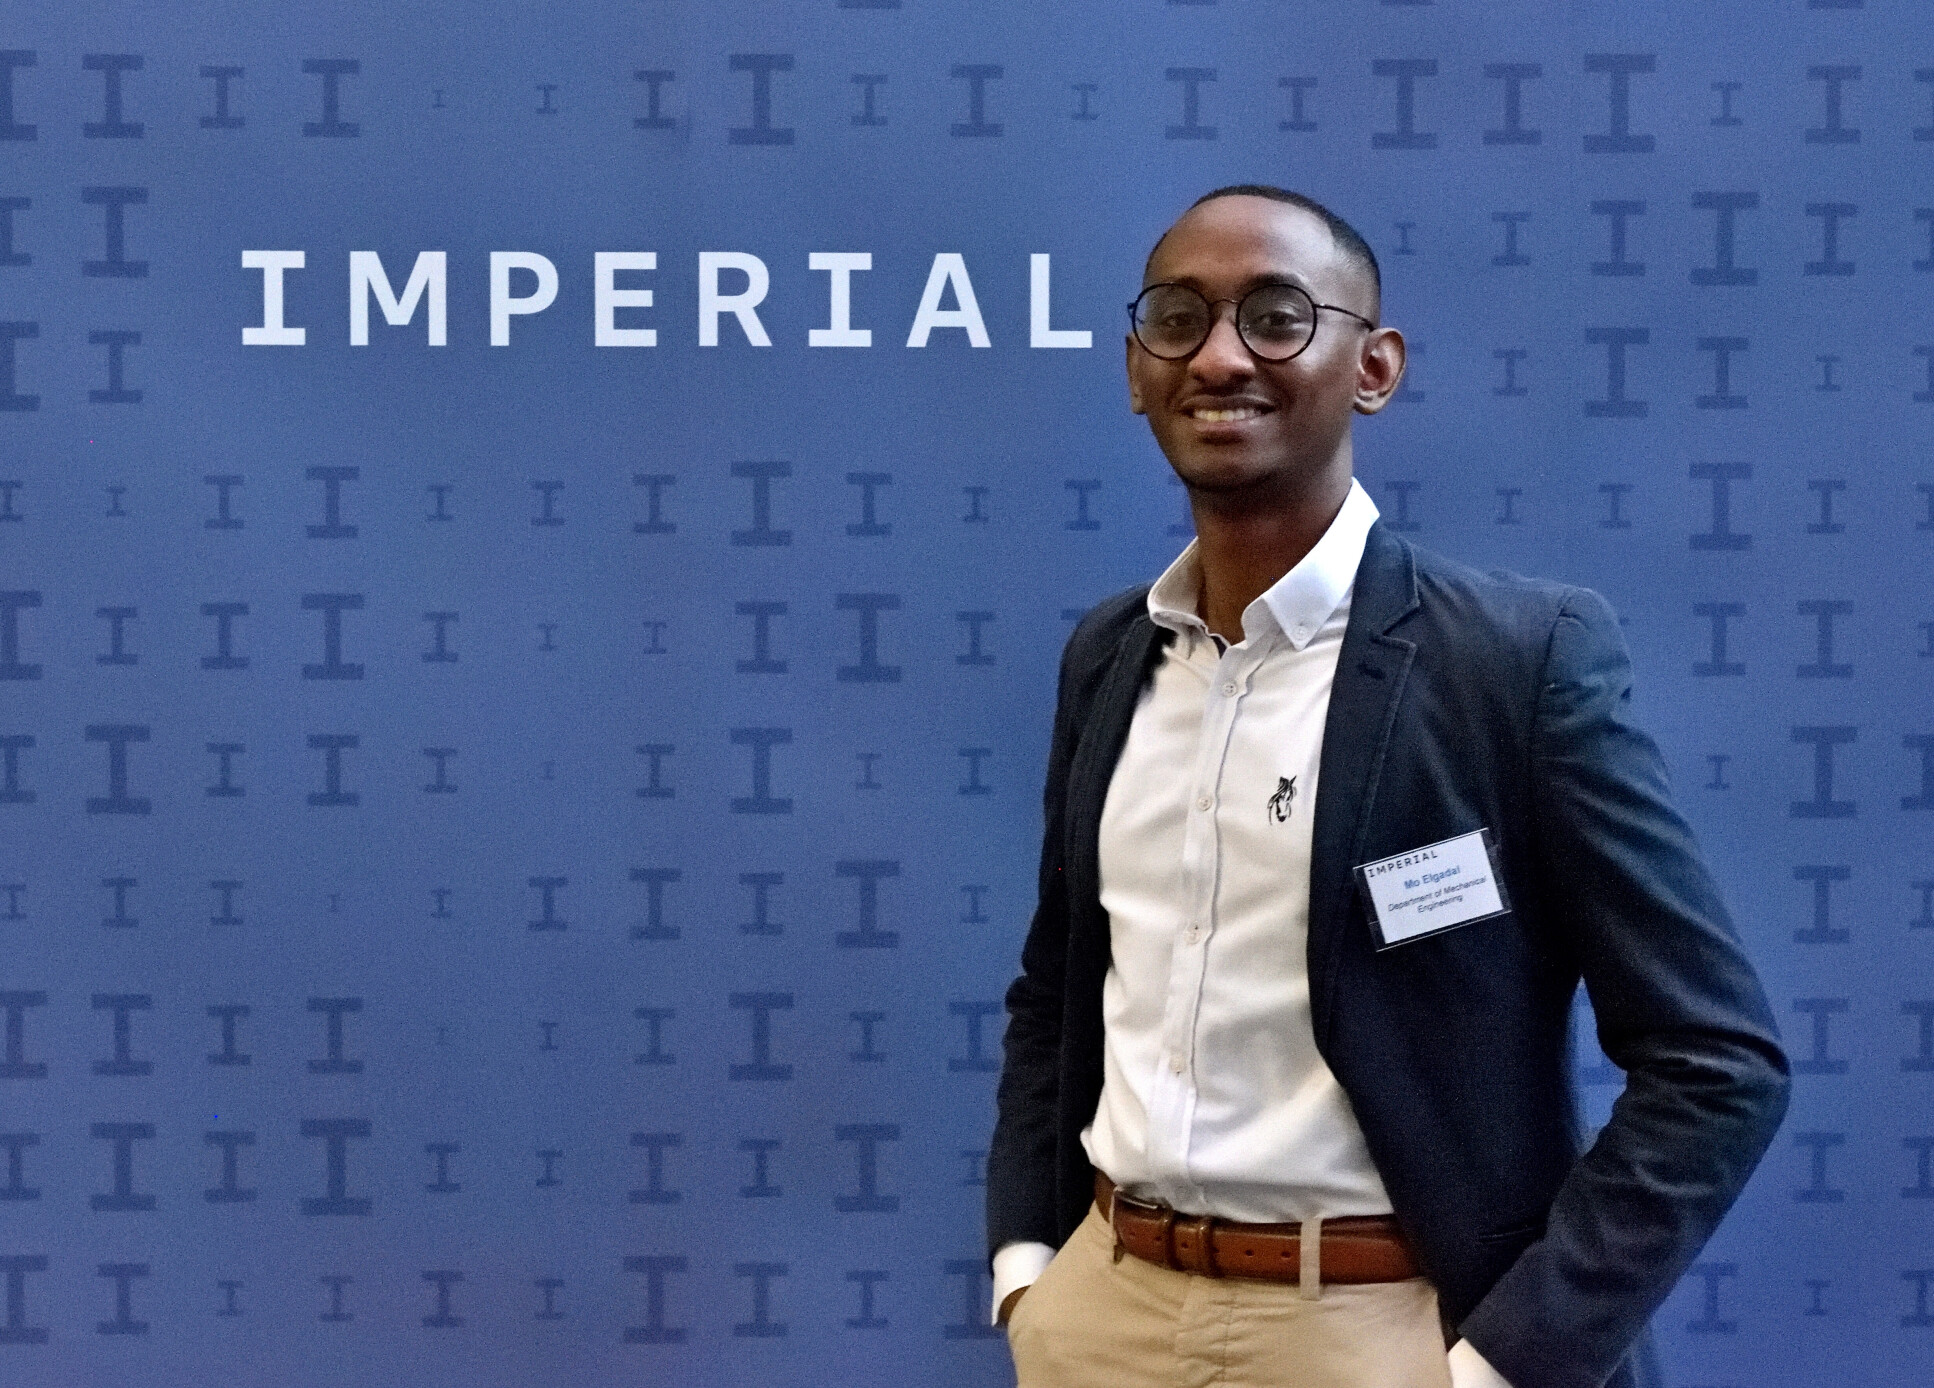 Mo Elgadal, from Sudan, is a Chevening Scholar